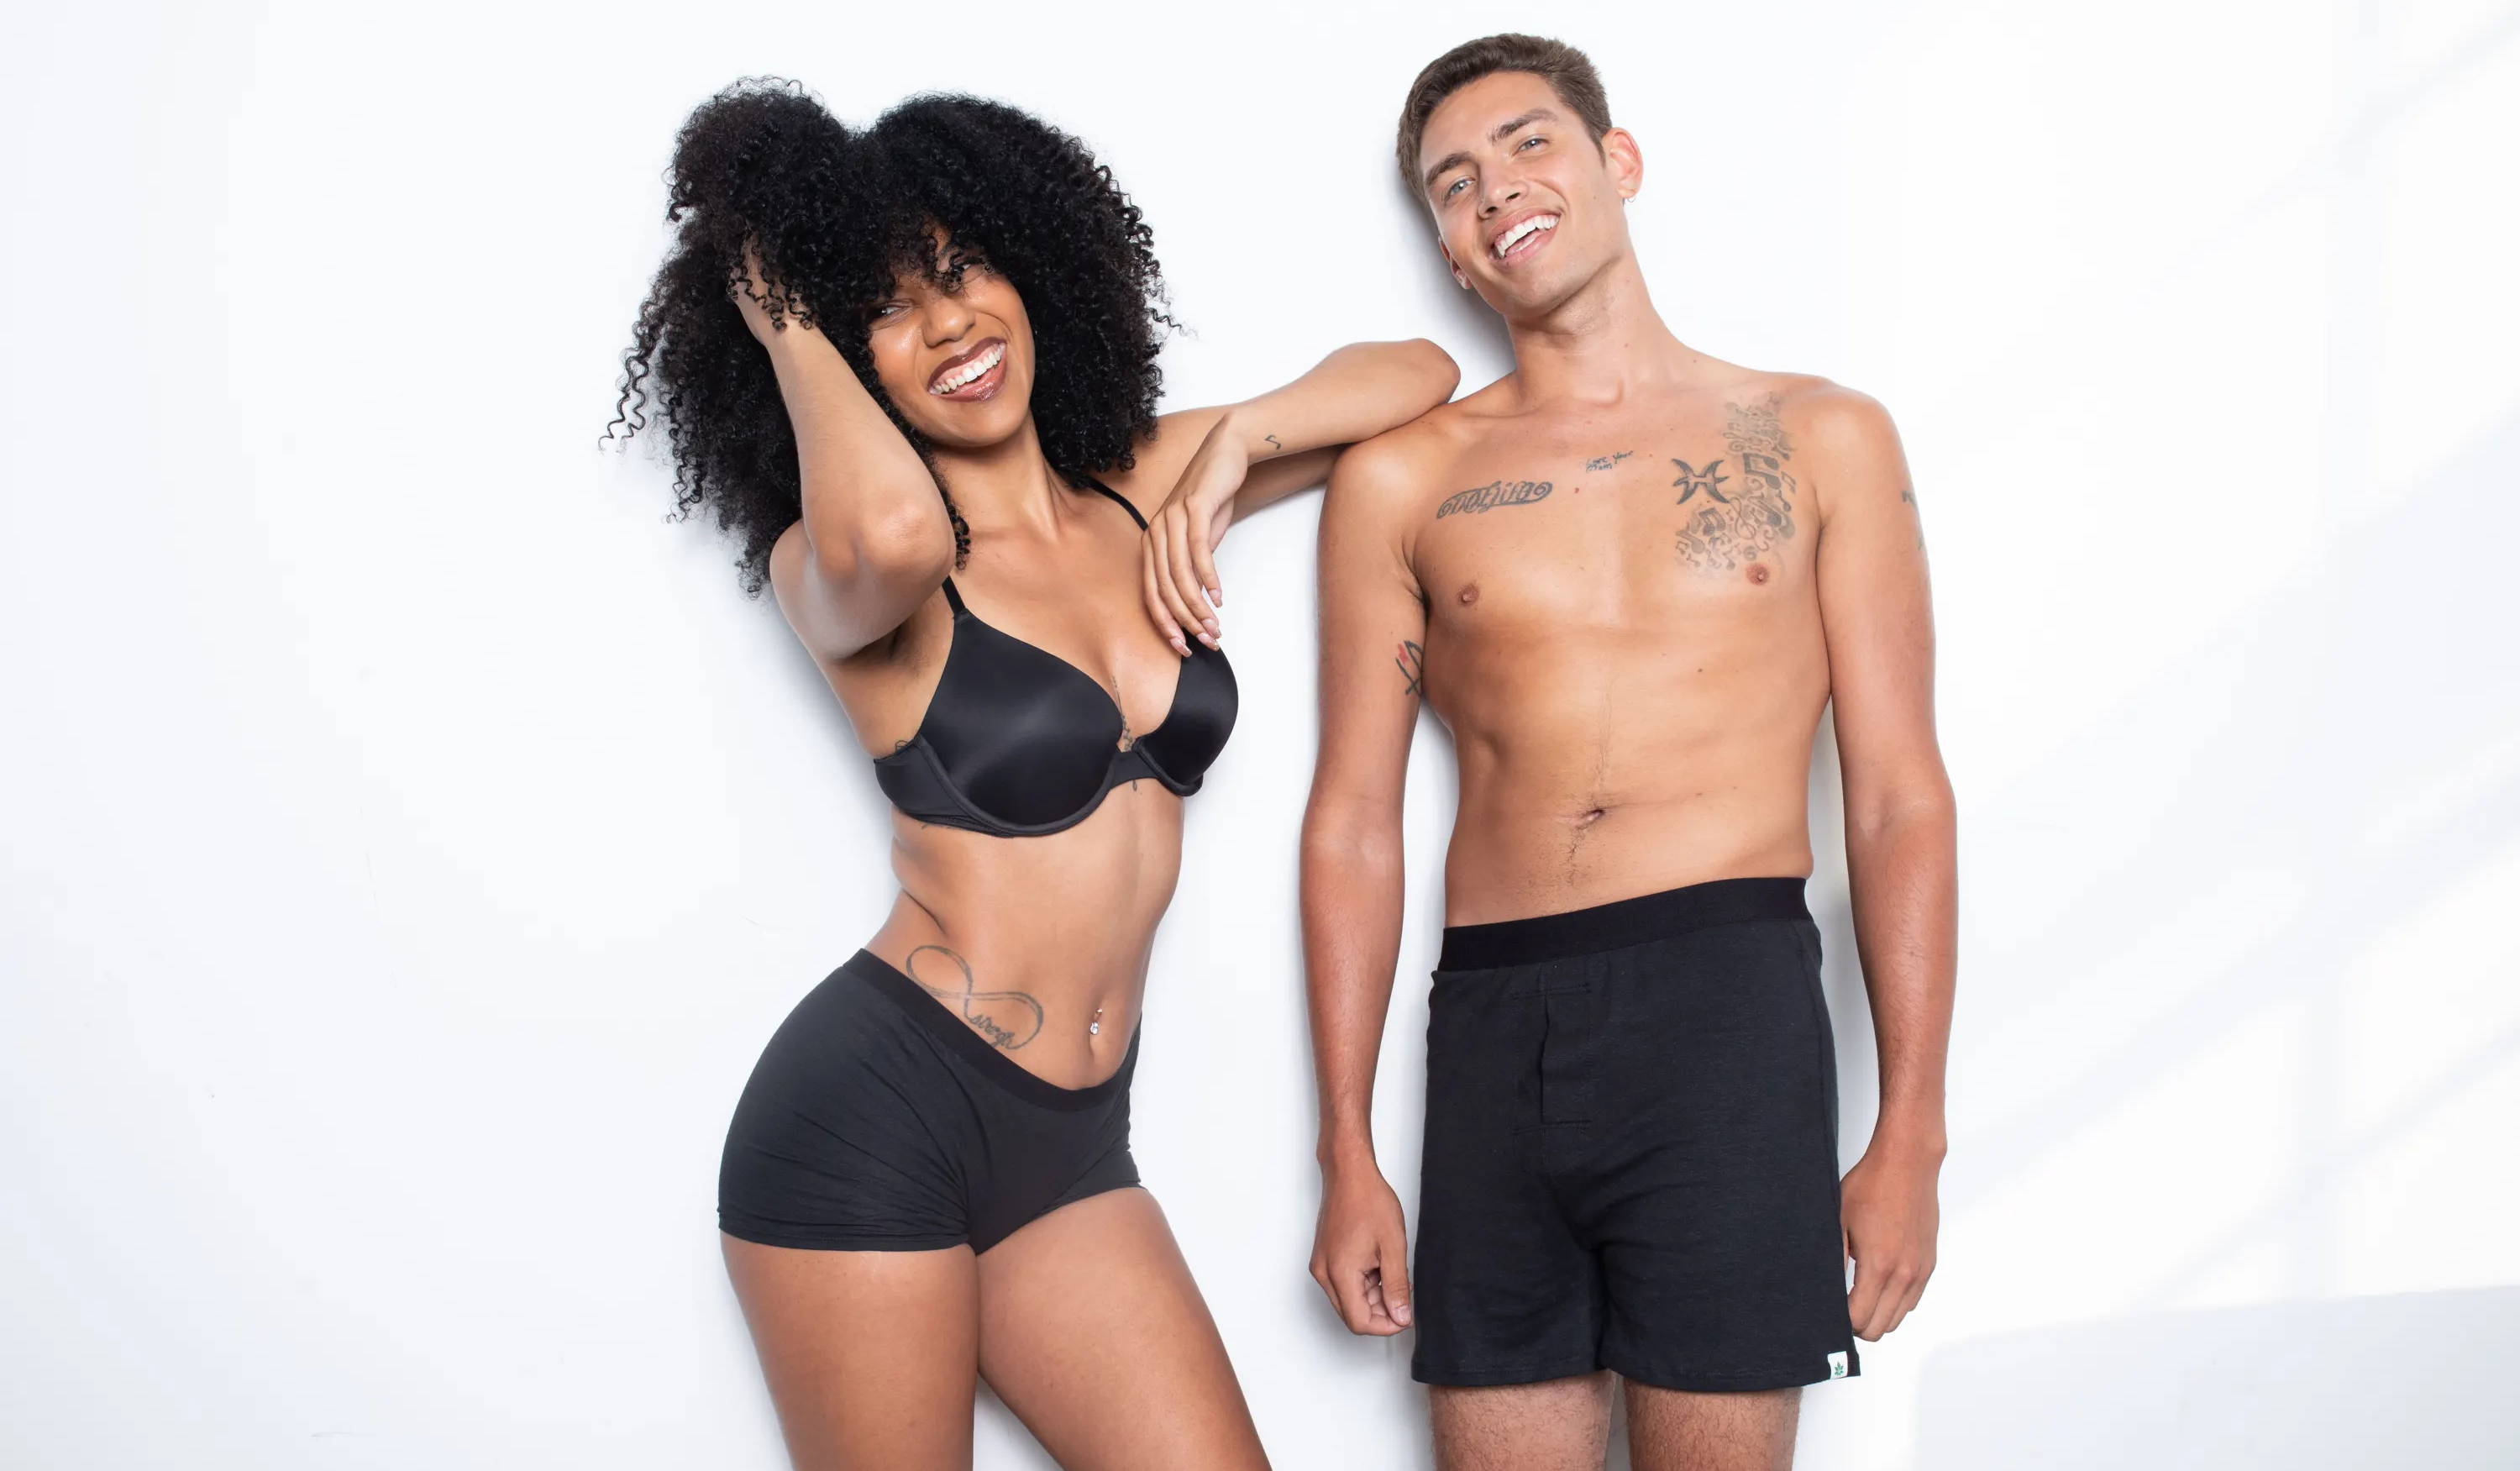 A man and woman stand smiling in WAMA hemp underwear, with the woman scrunching her hair and leaning on the man.